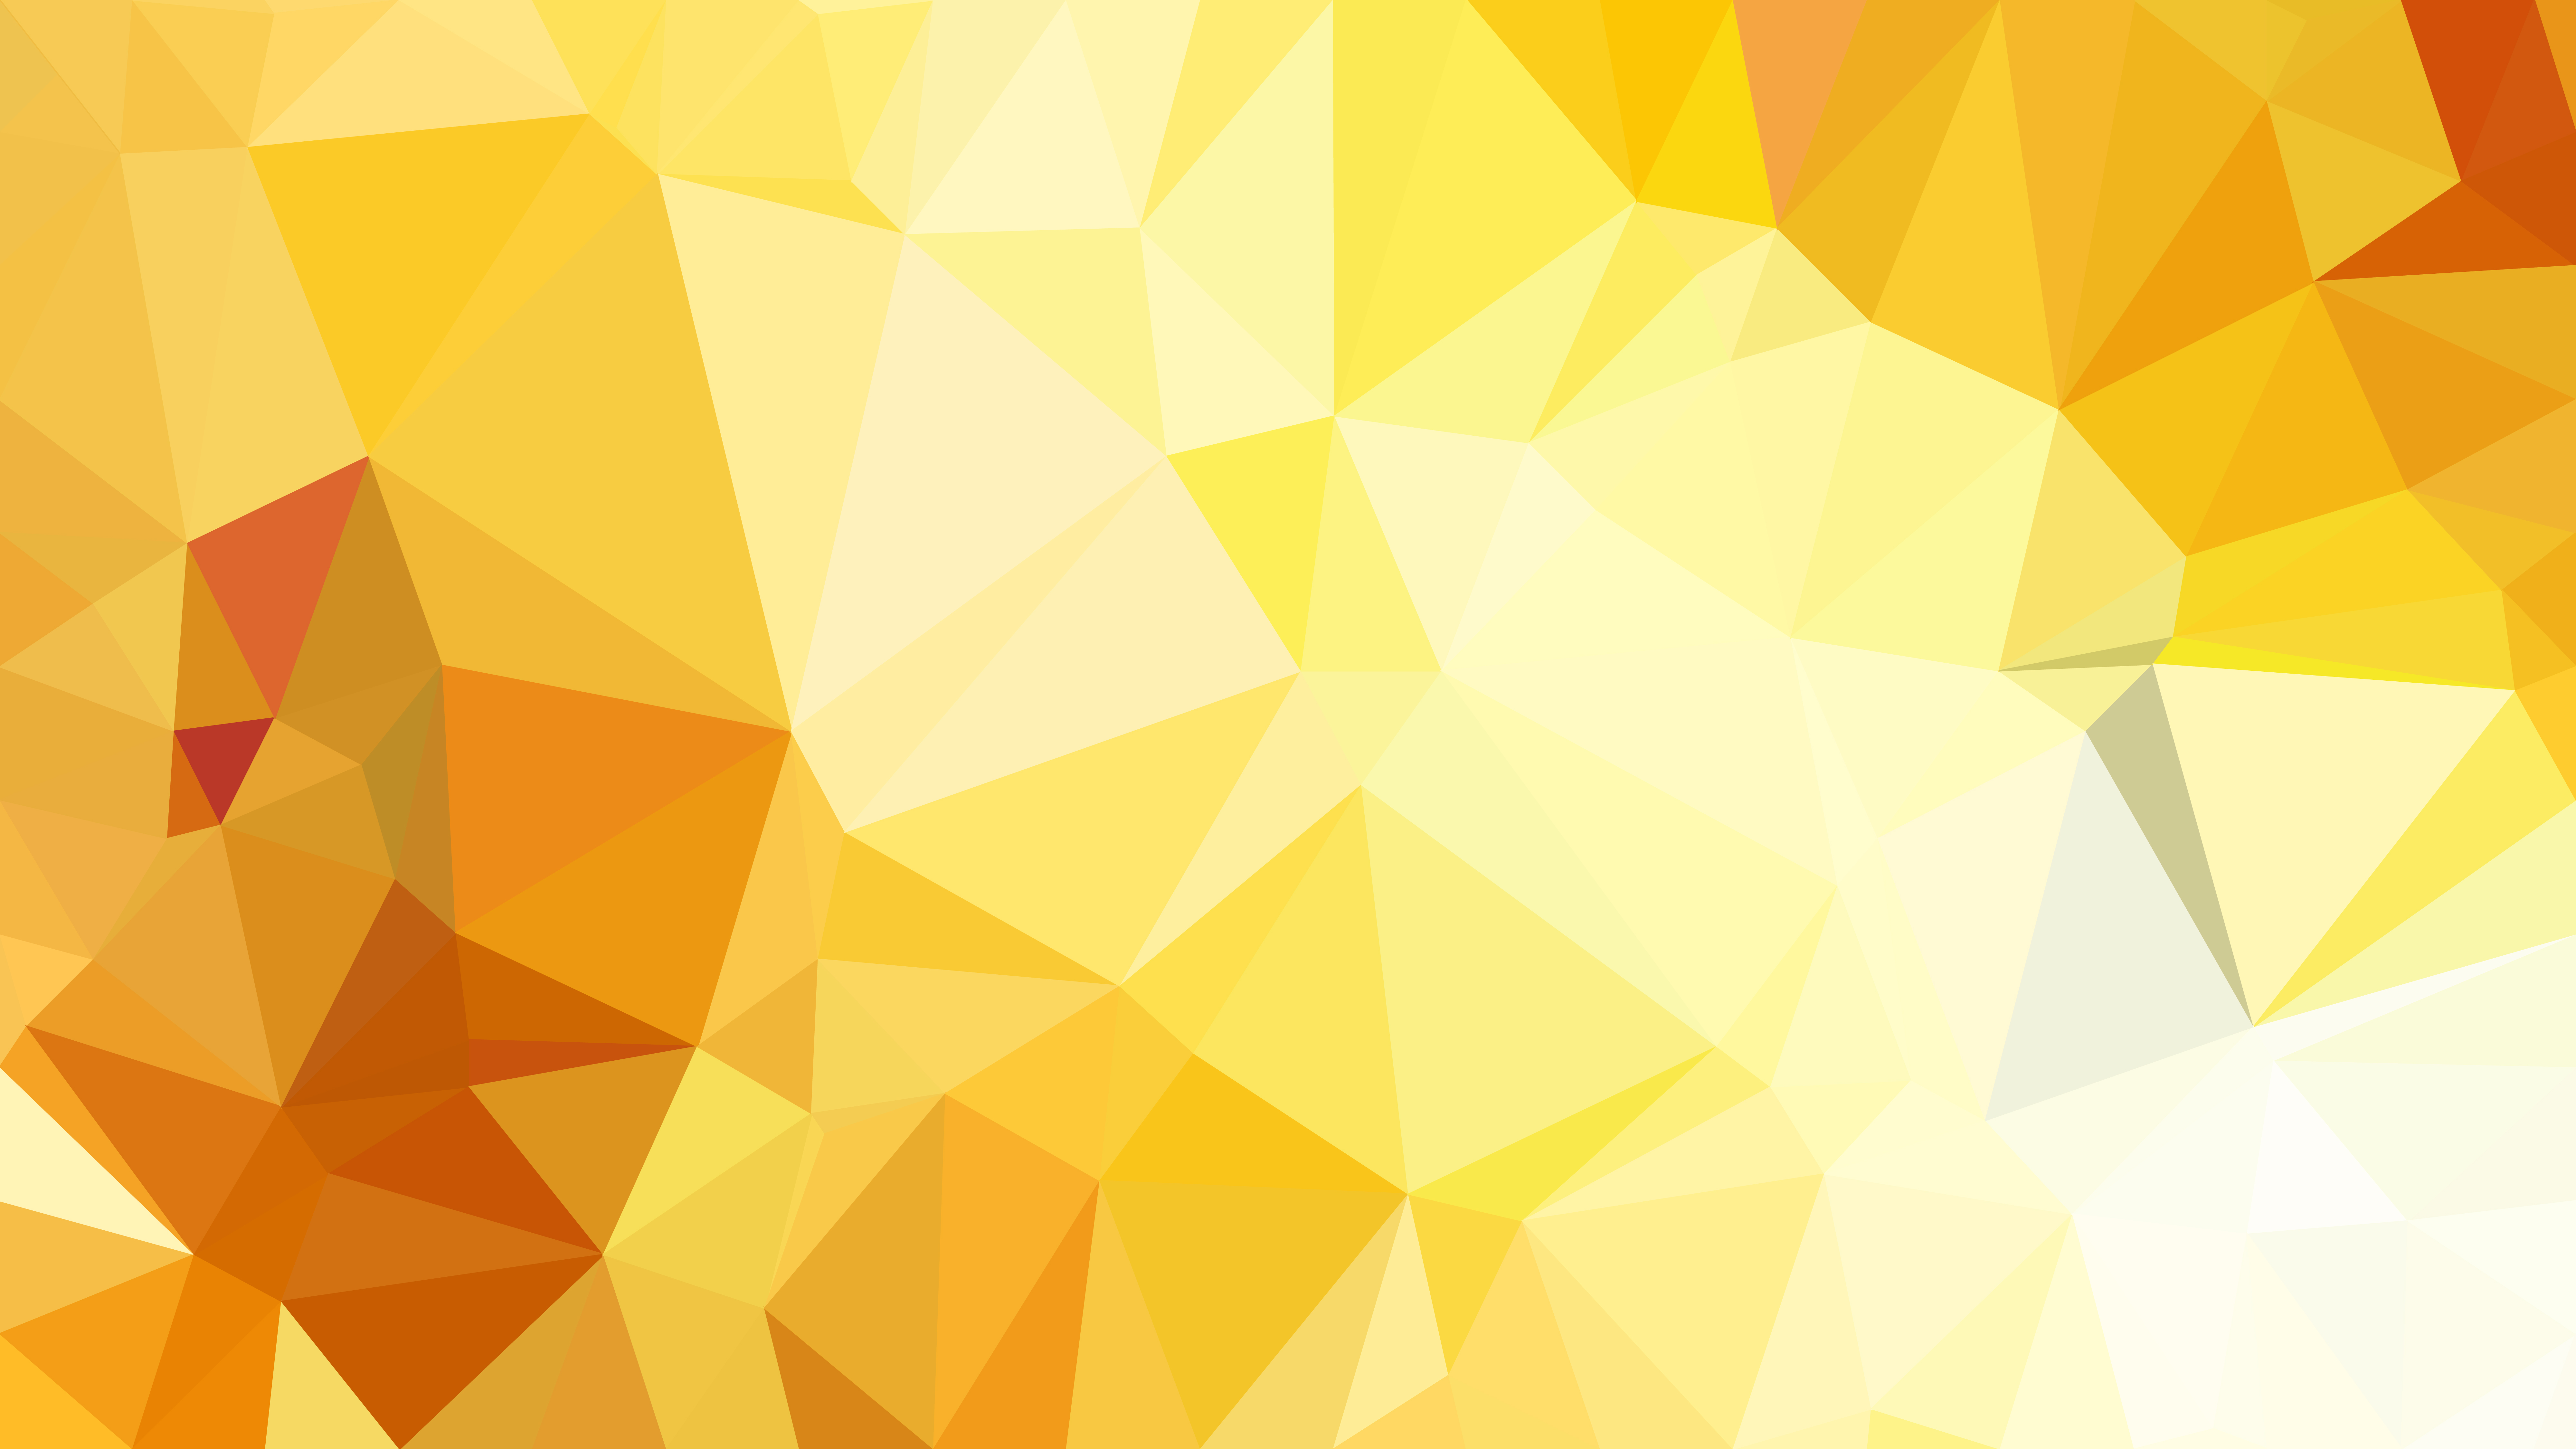 Free Abstract Orange and White Triangle Geometric Background Vector